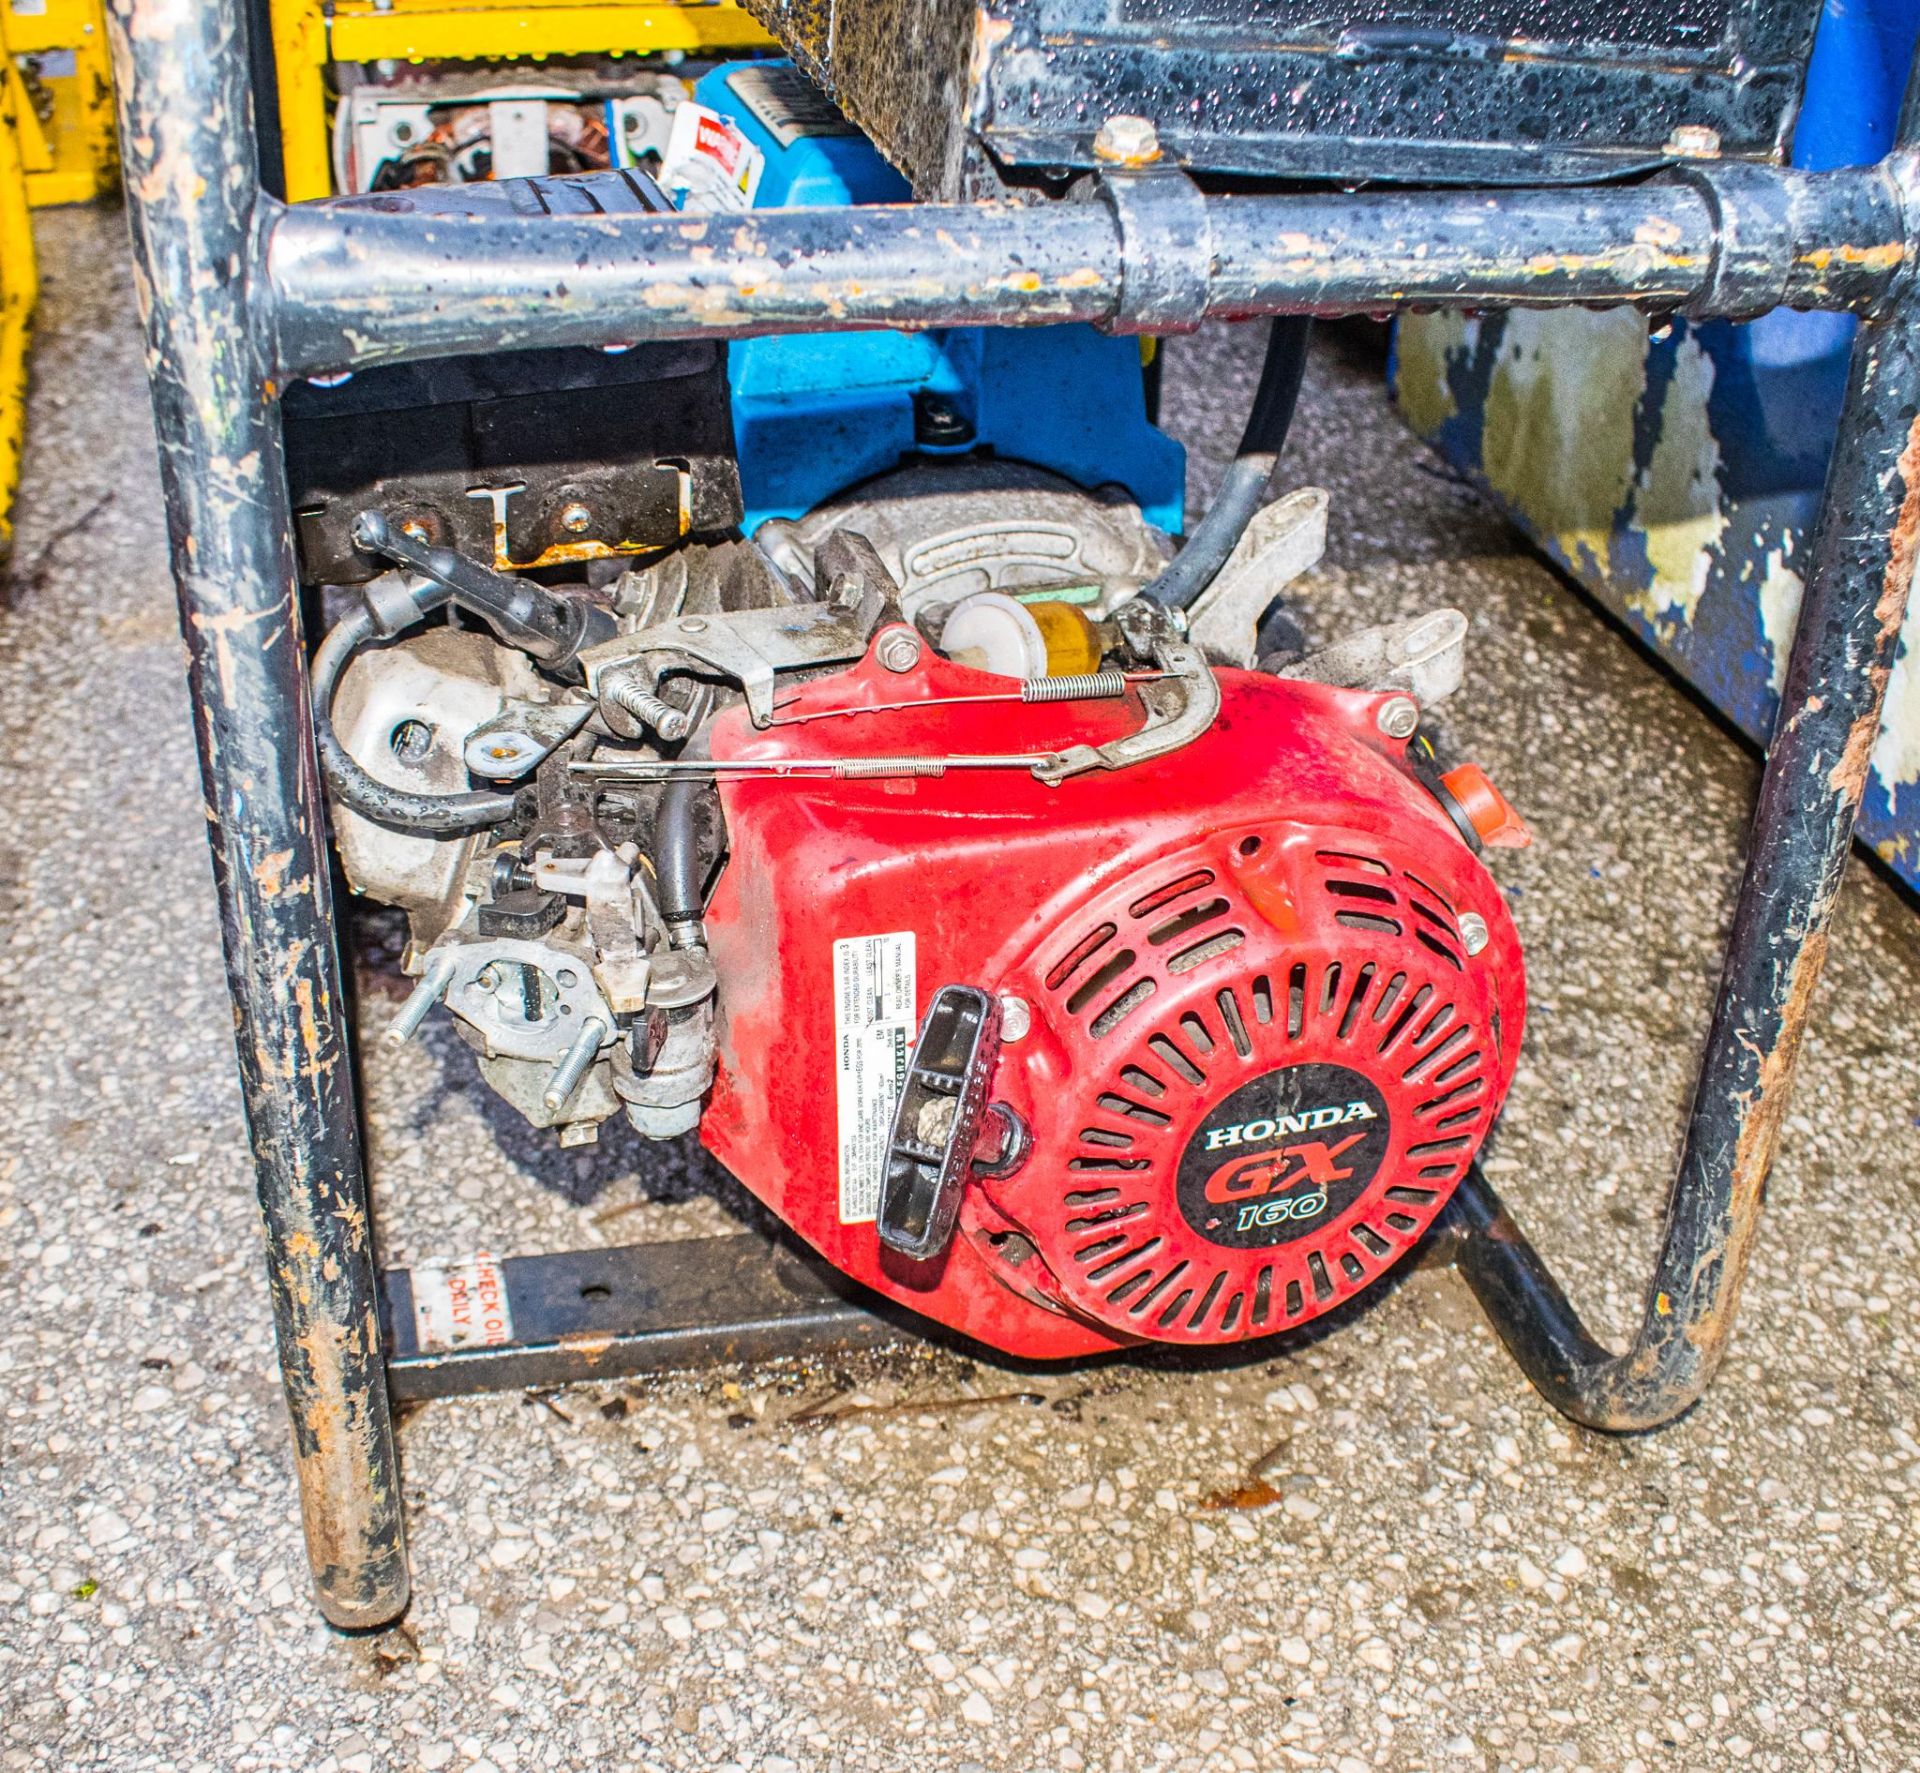 Stephill petrol driven generator ** Parts missing ** - Image 2 of 2